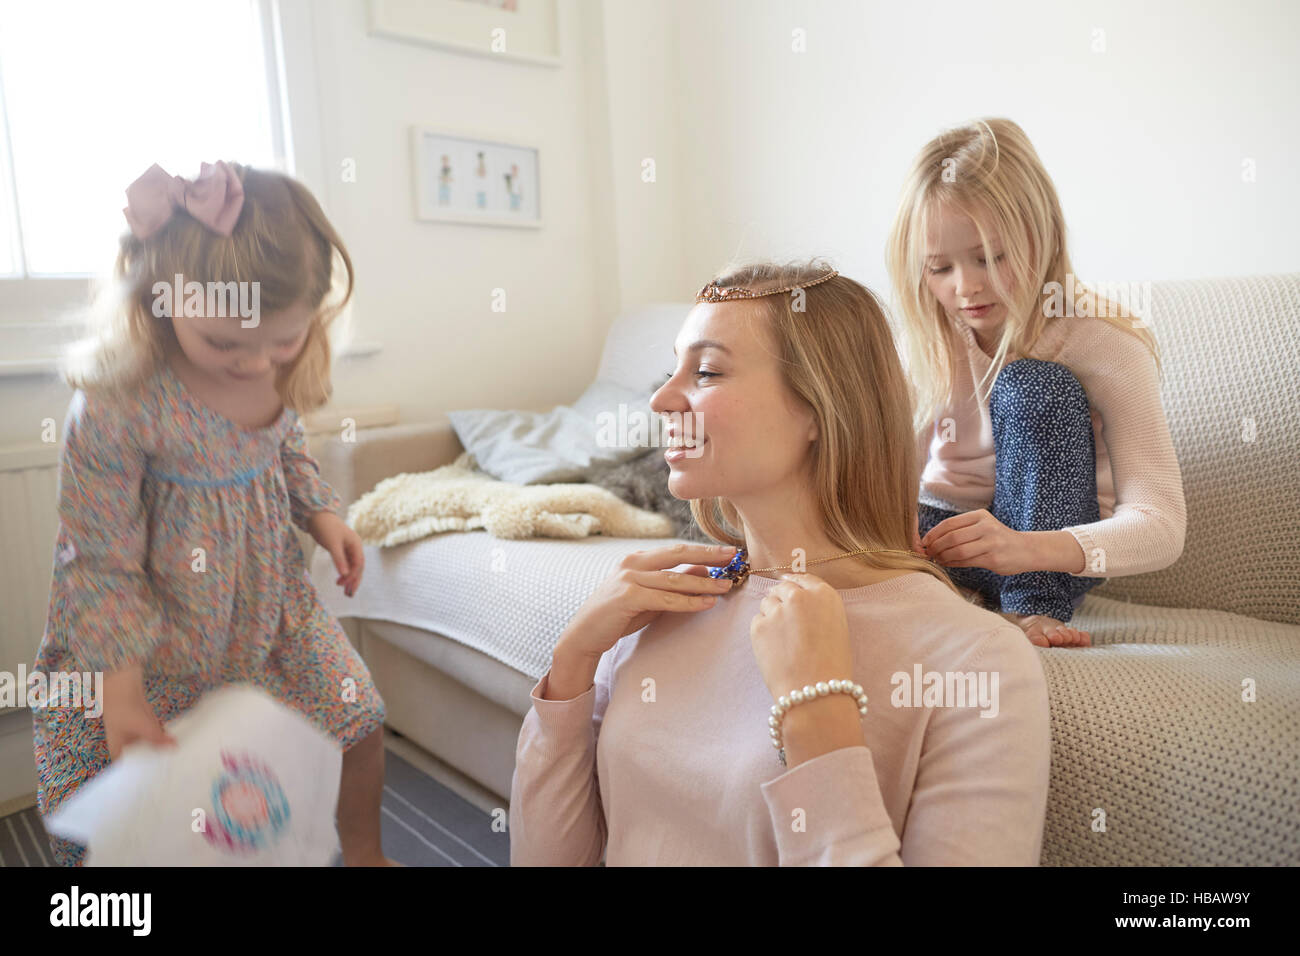 Girl putting necklace onto mother in living room Stock Photo